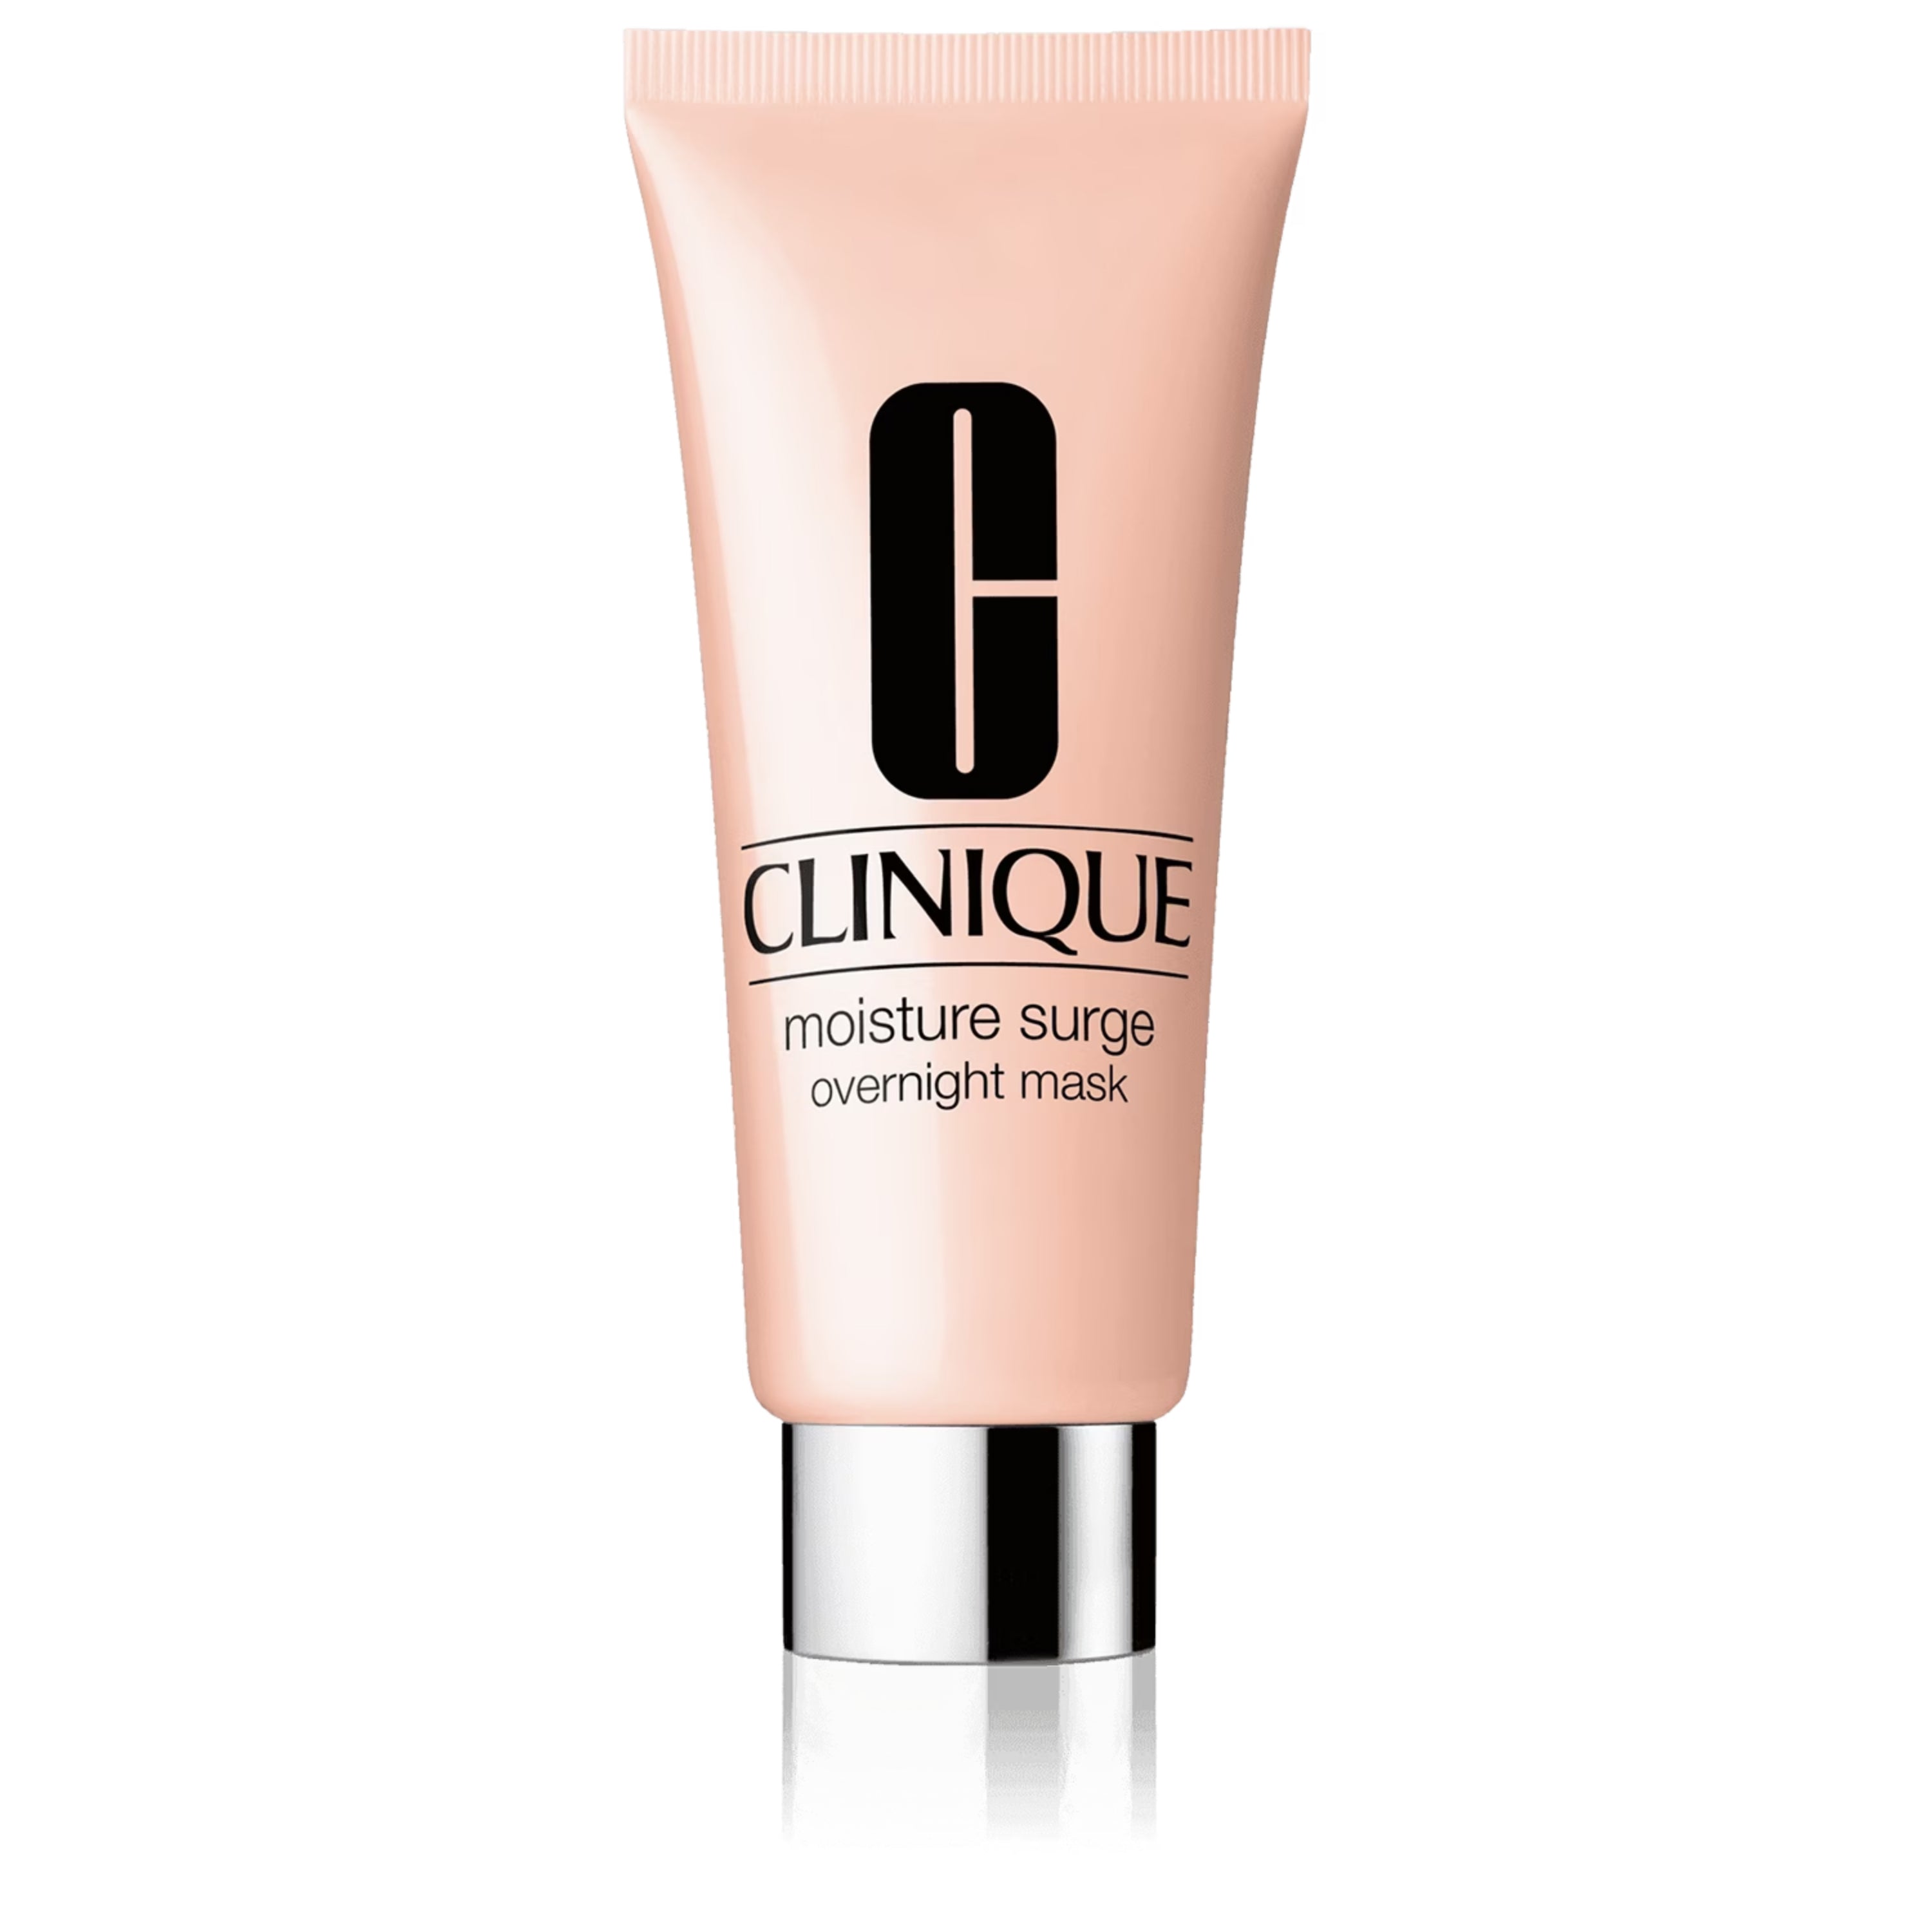 CLINIQUE Mositure Surge Overnight Mask 100ml